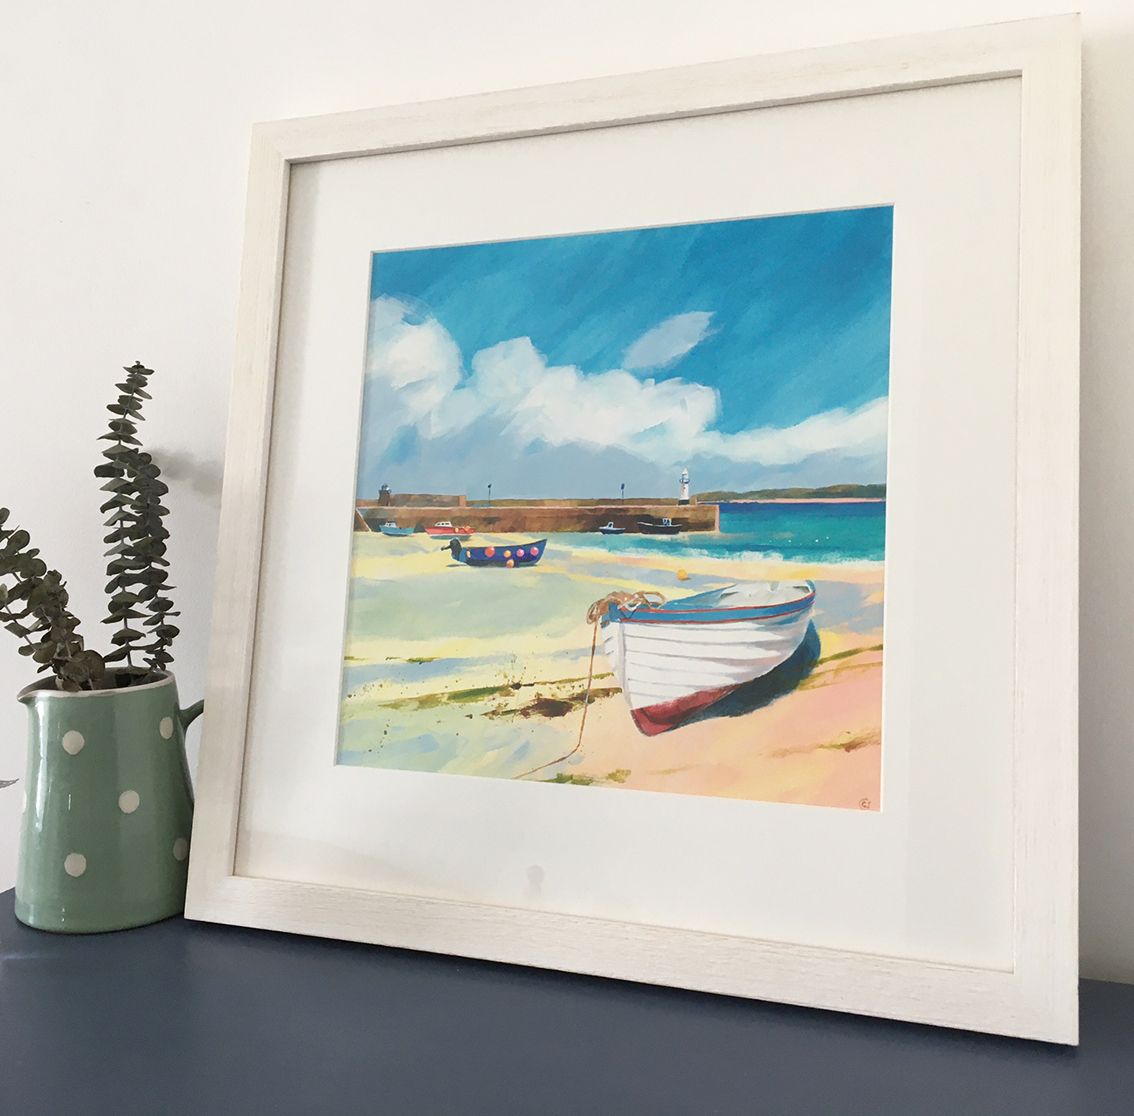 Smeaton's Pier by carolyn carter - Secondary Image